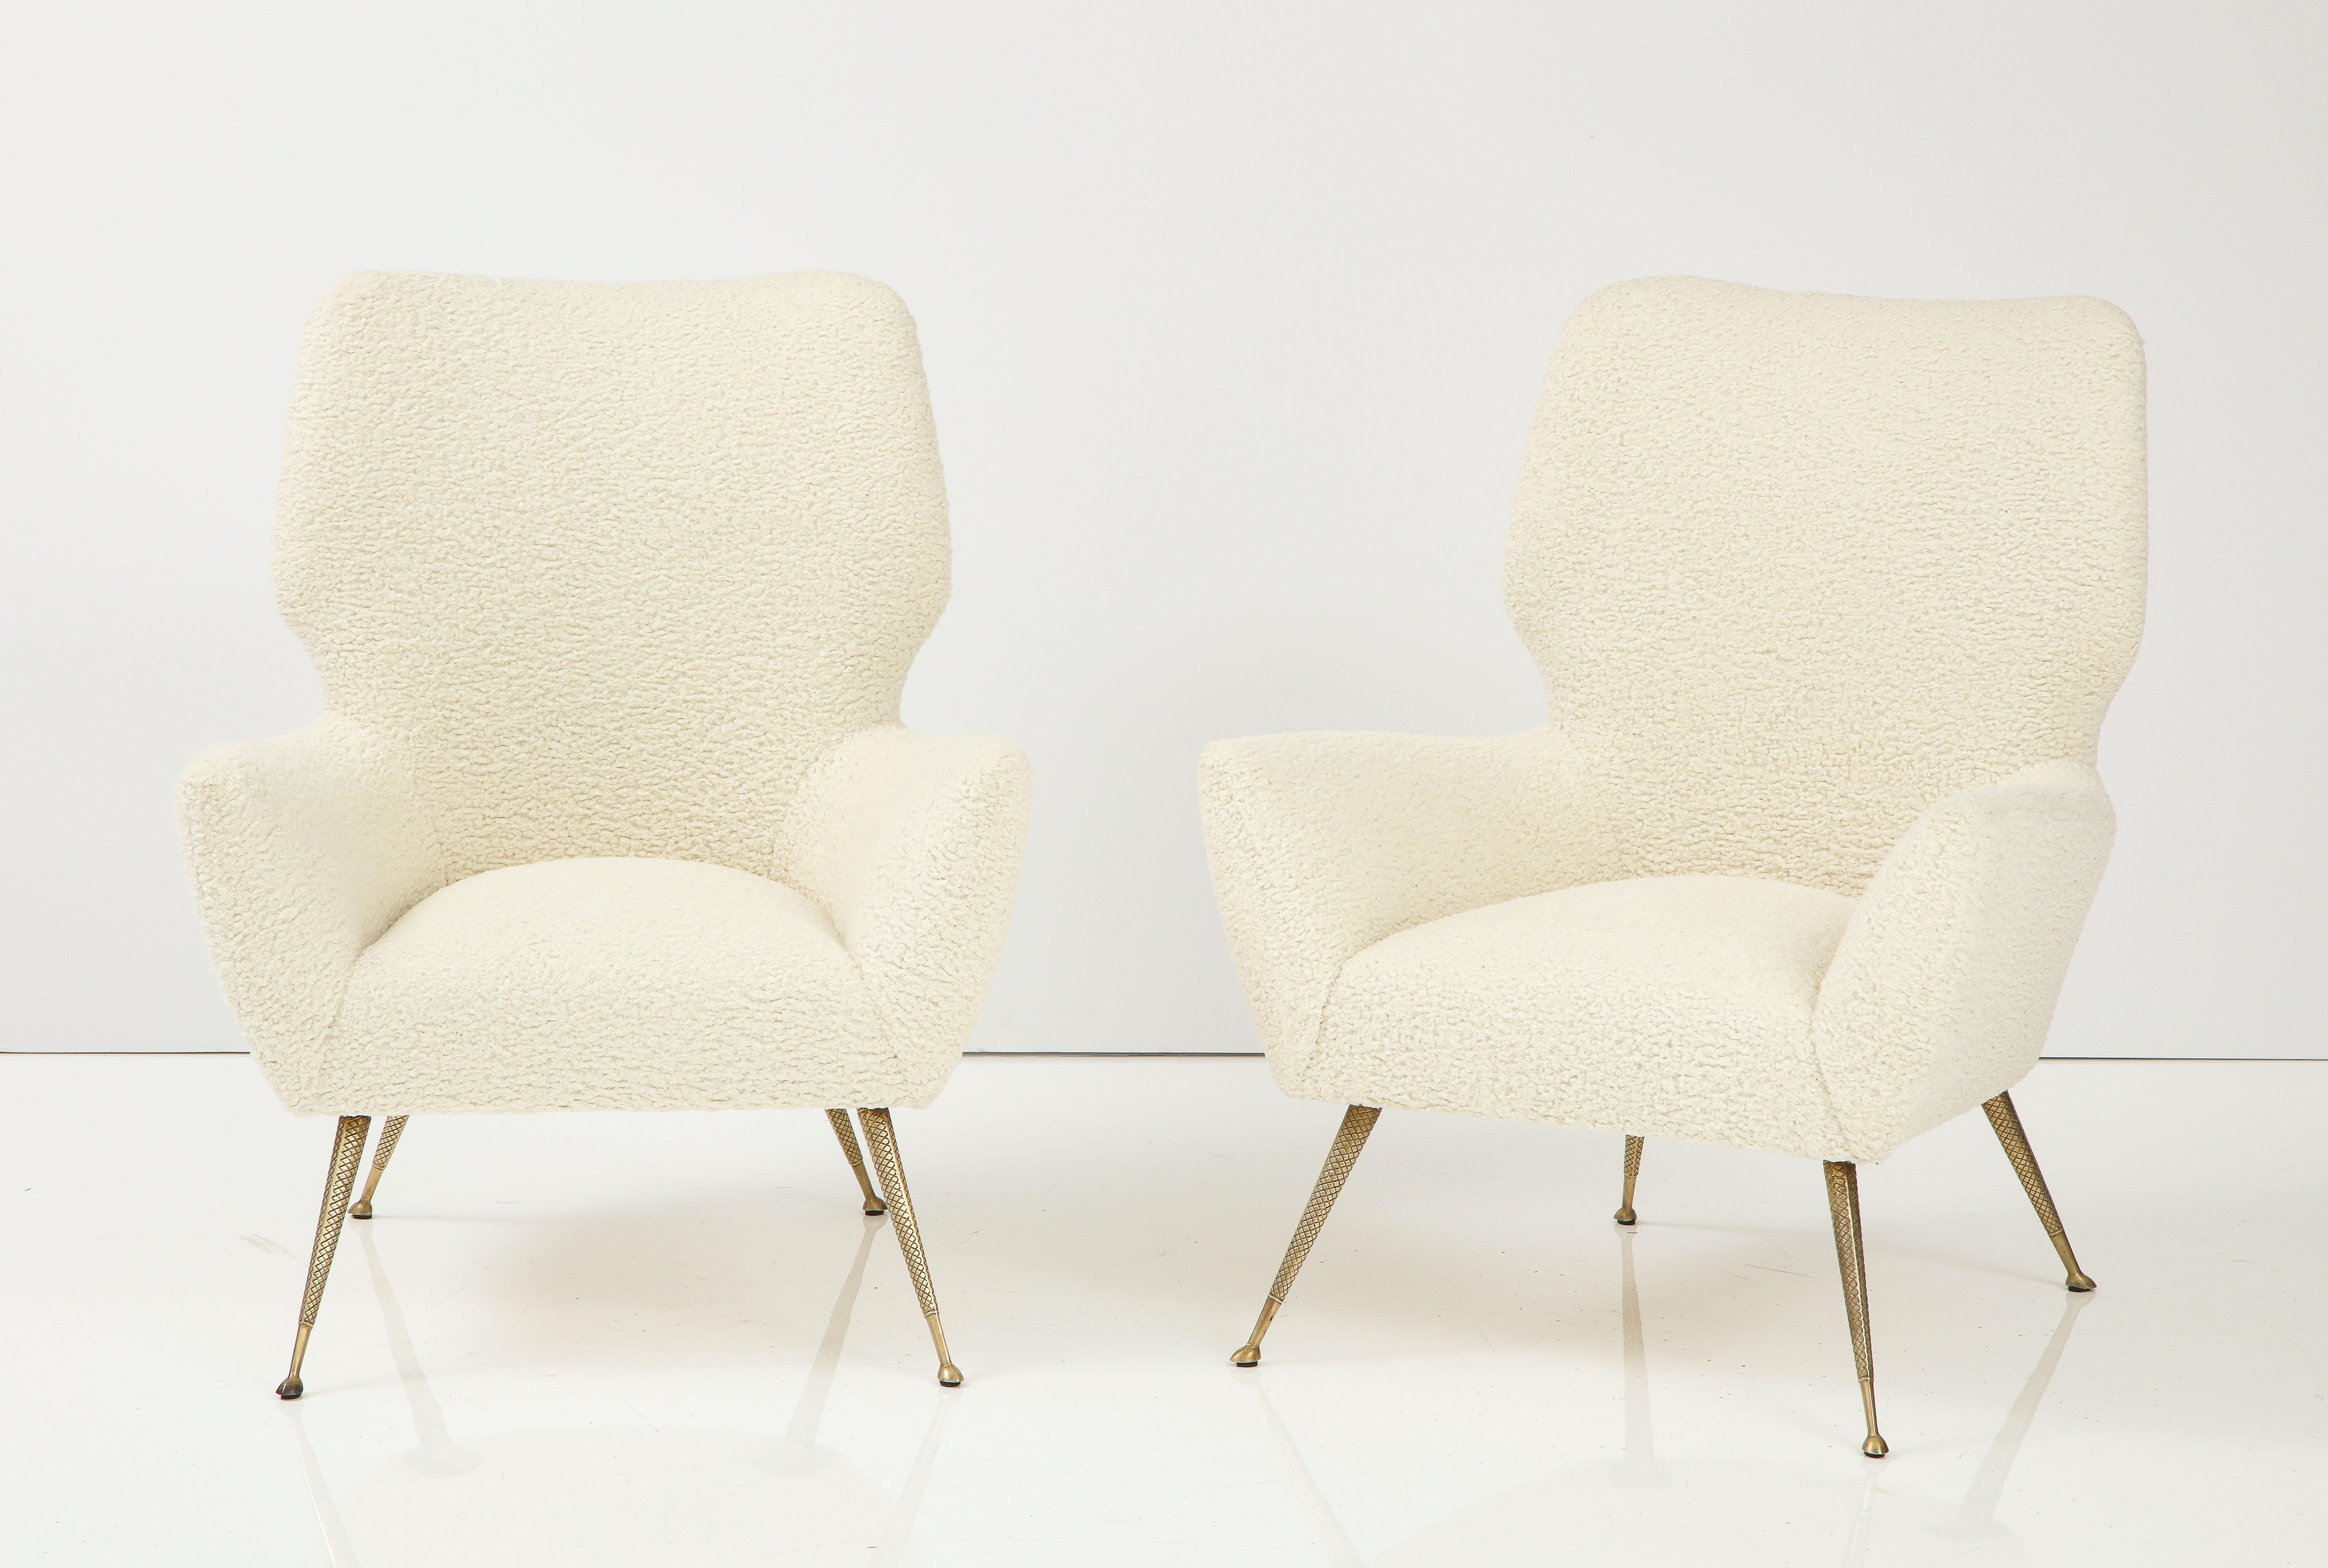 Italian pair of chairs with brass legs, Gio Ponti for Casa e Giardino.
A rare and unique pair of chairs with curved, elegantly shaped back and arms supported on splayed and tapered cast brass legs with a cross hatch design. Extremely elegant set